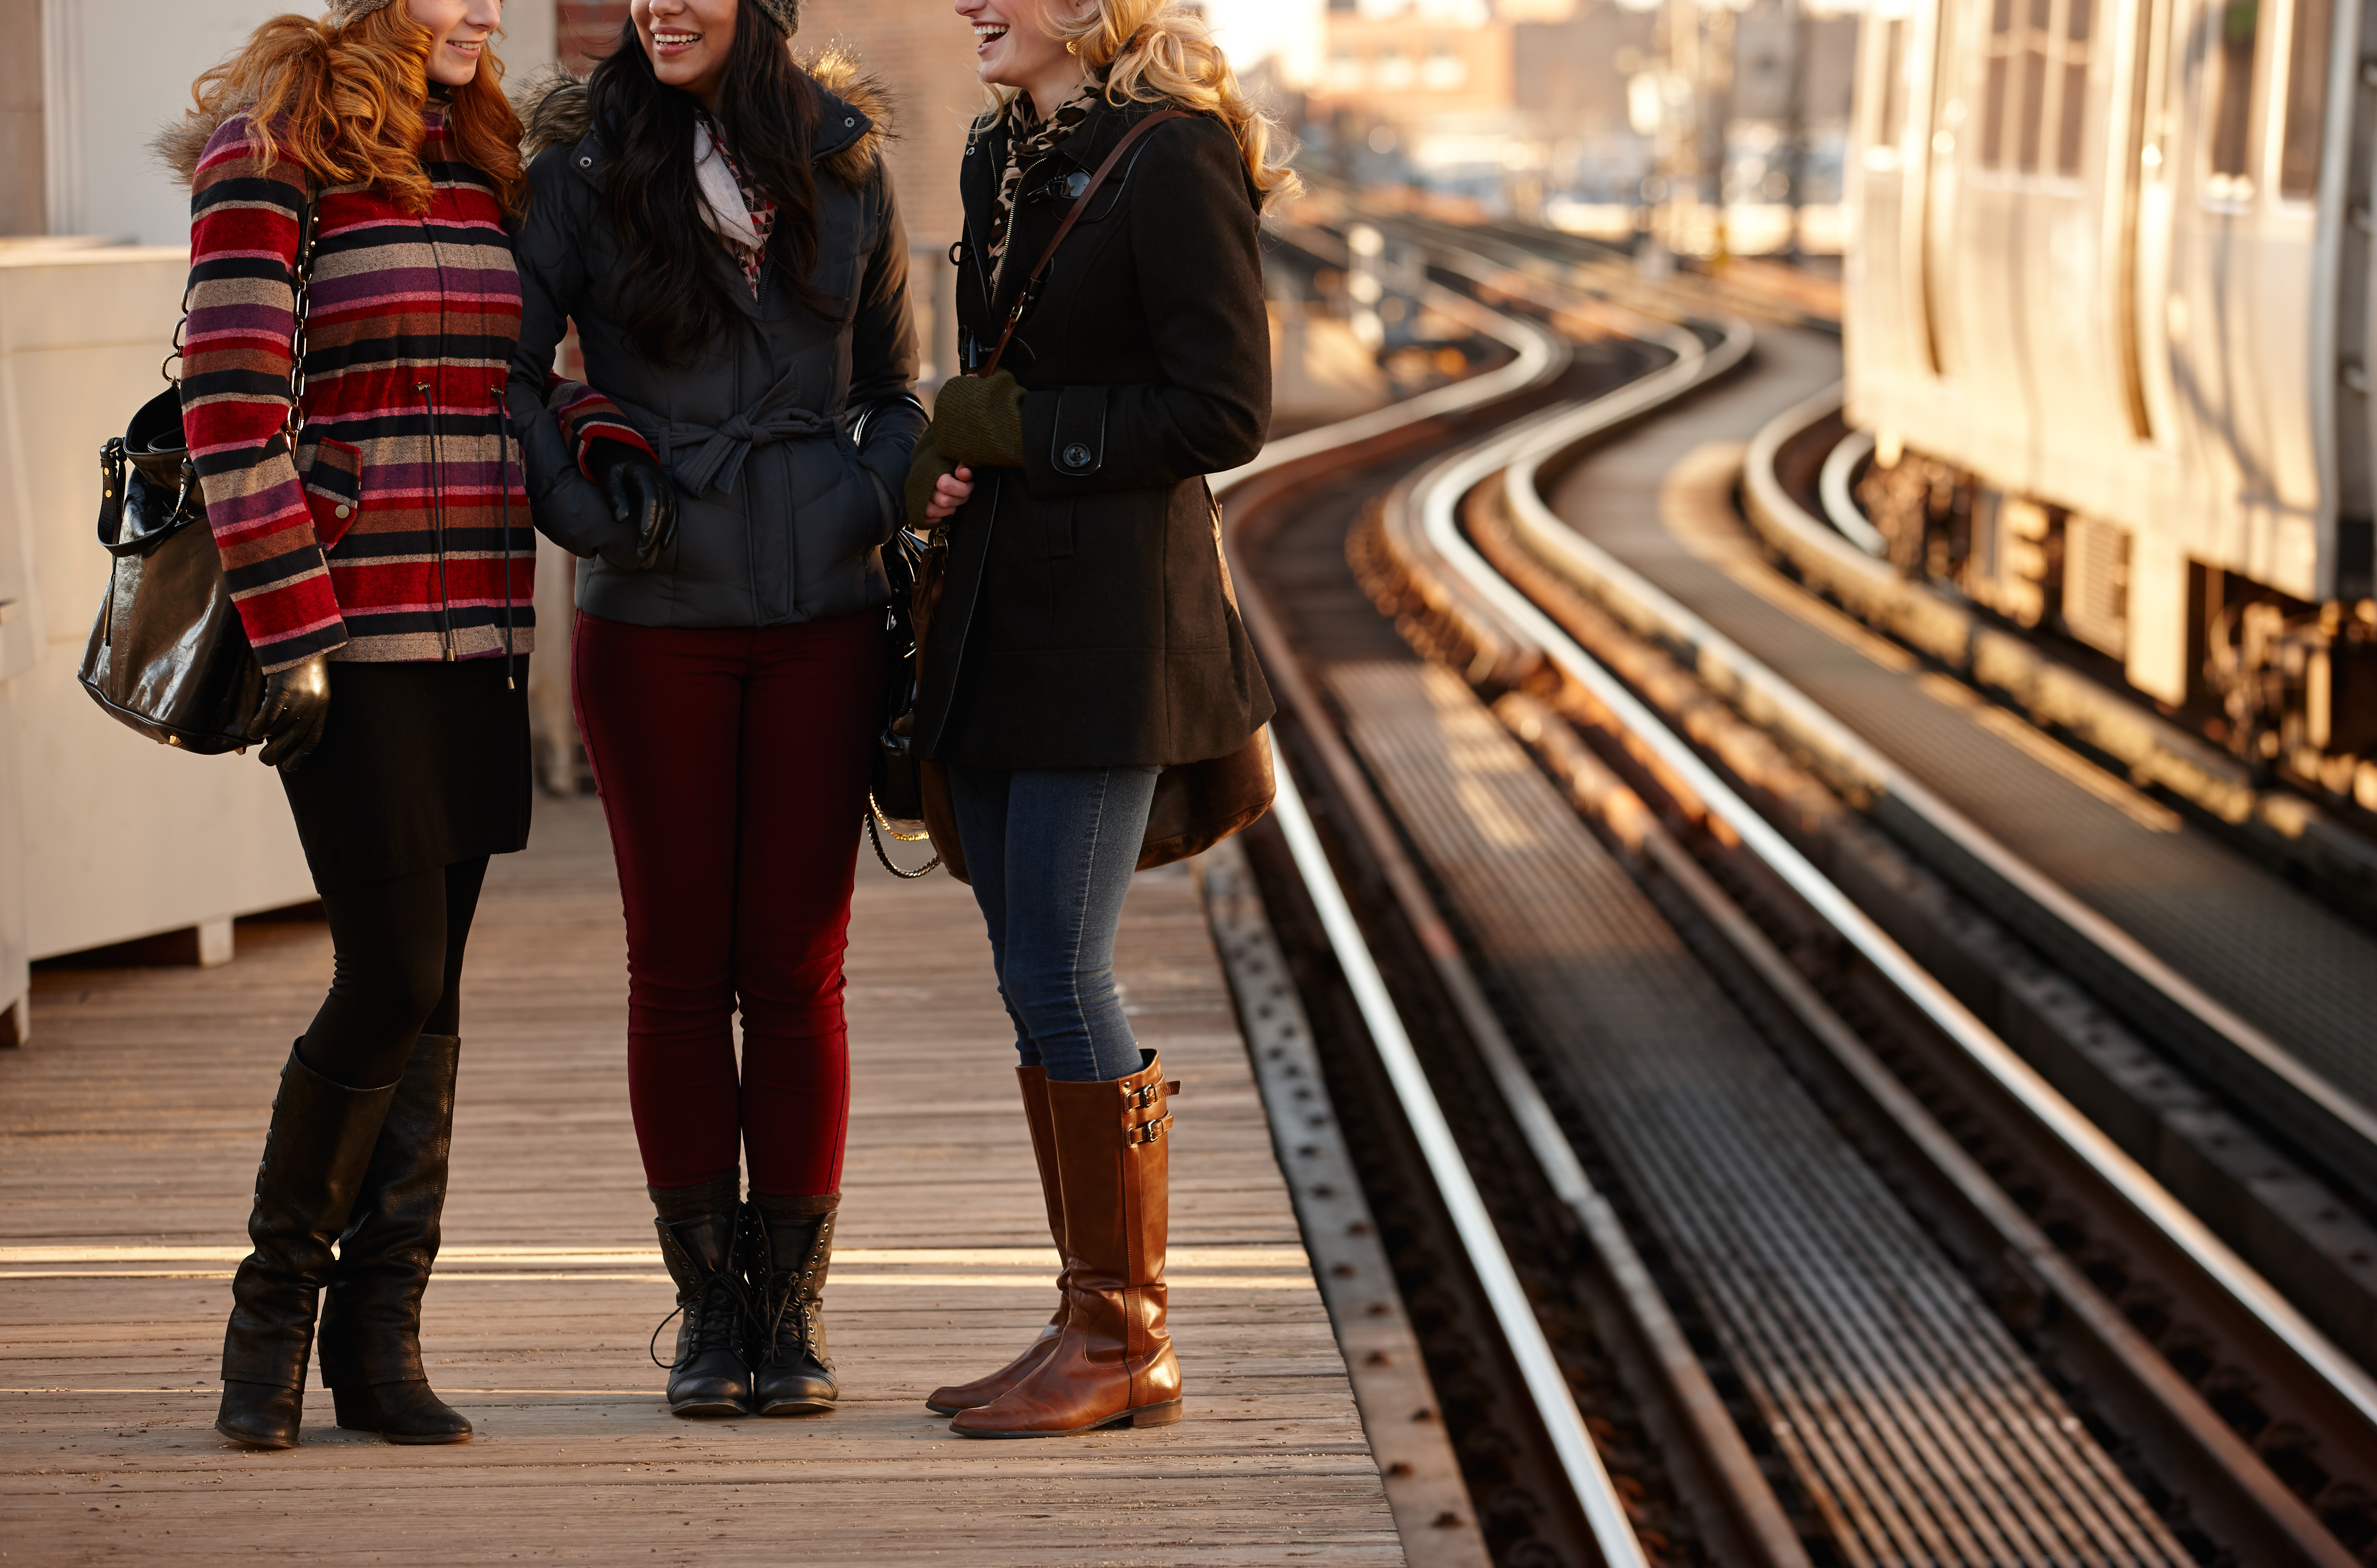 3 women standing on a platform and talking while waiting for a train to arrive